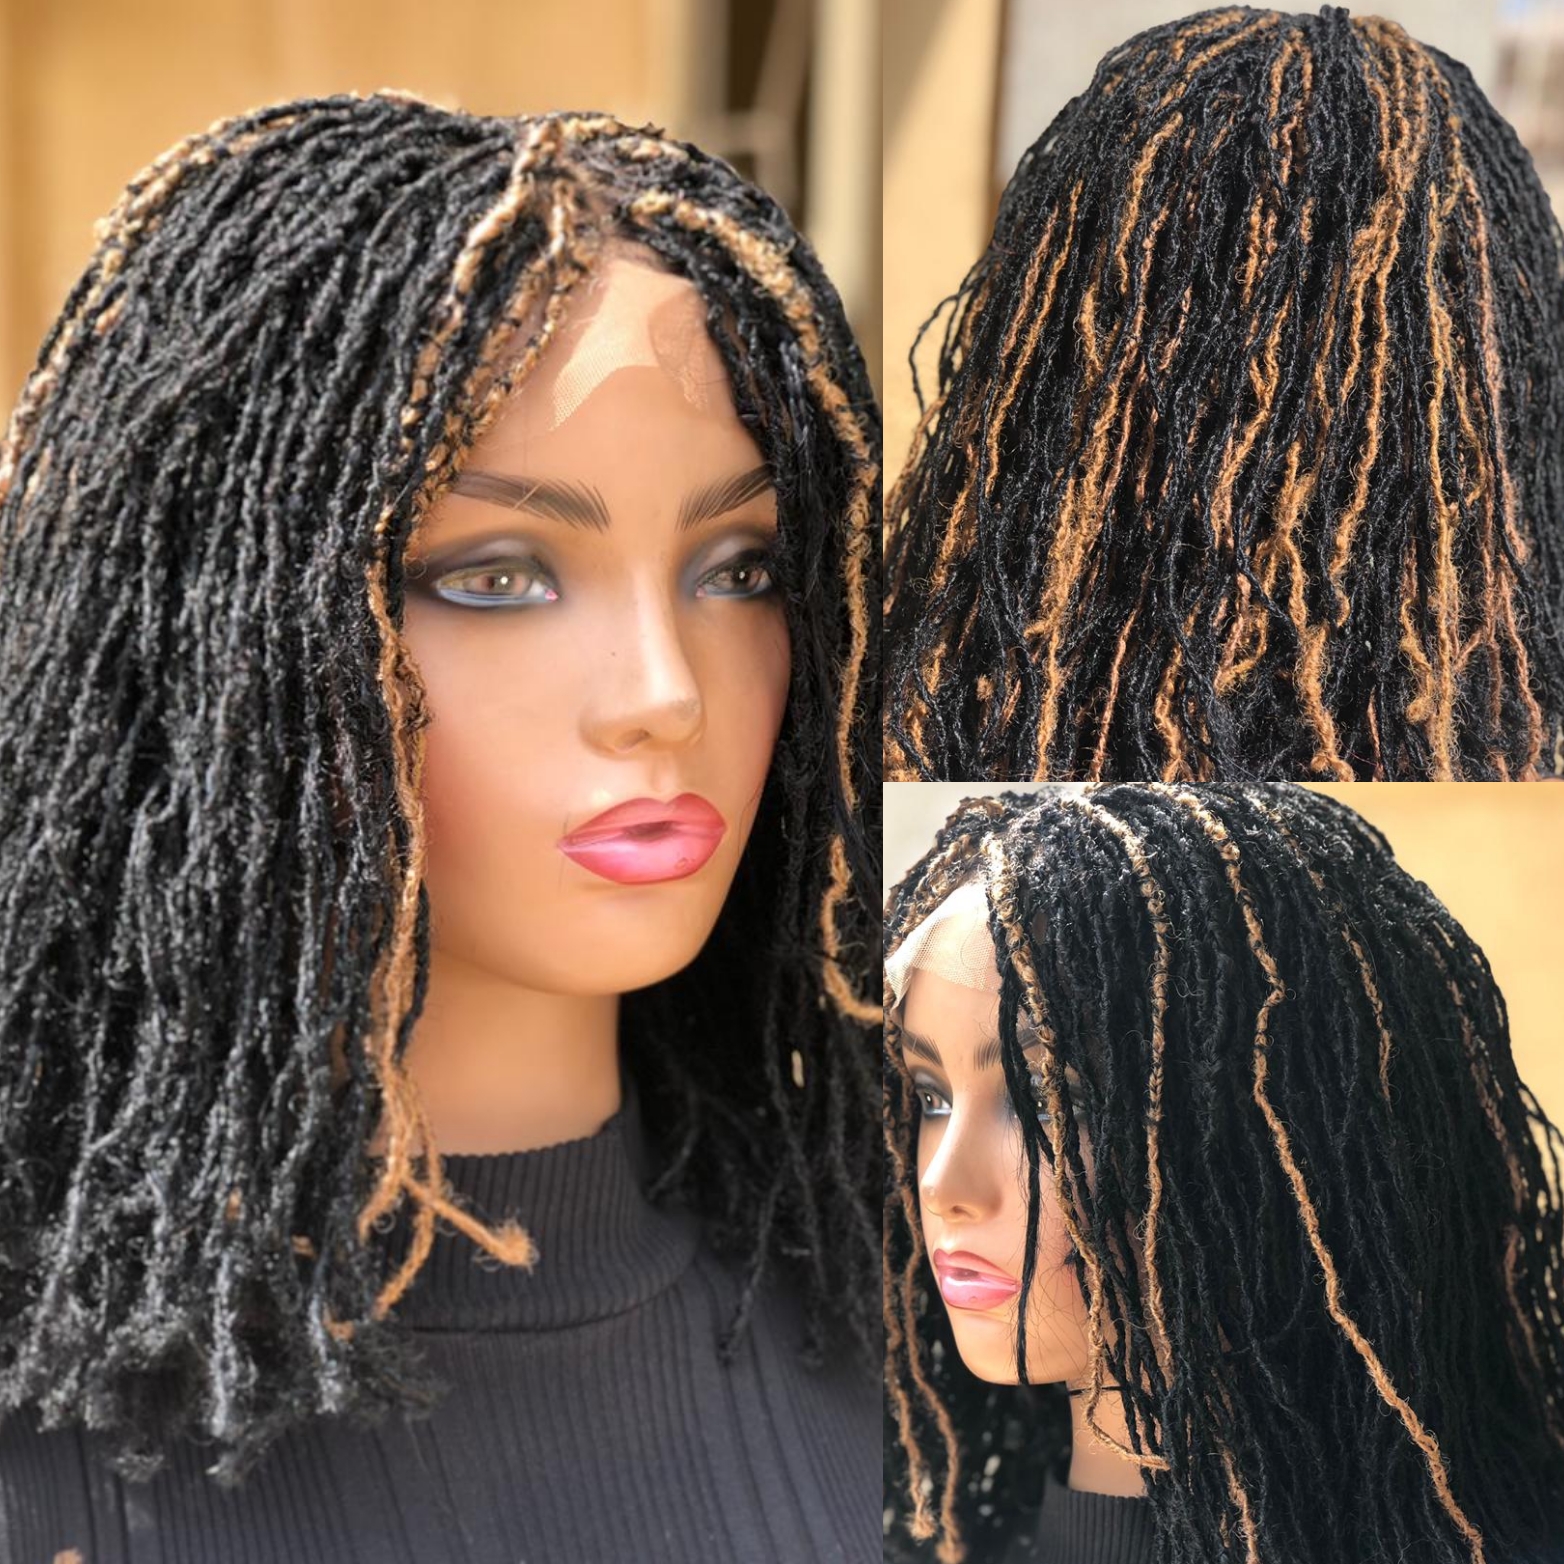 Braided Synthetic Sisterlocs Wig